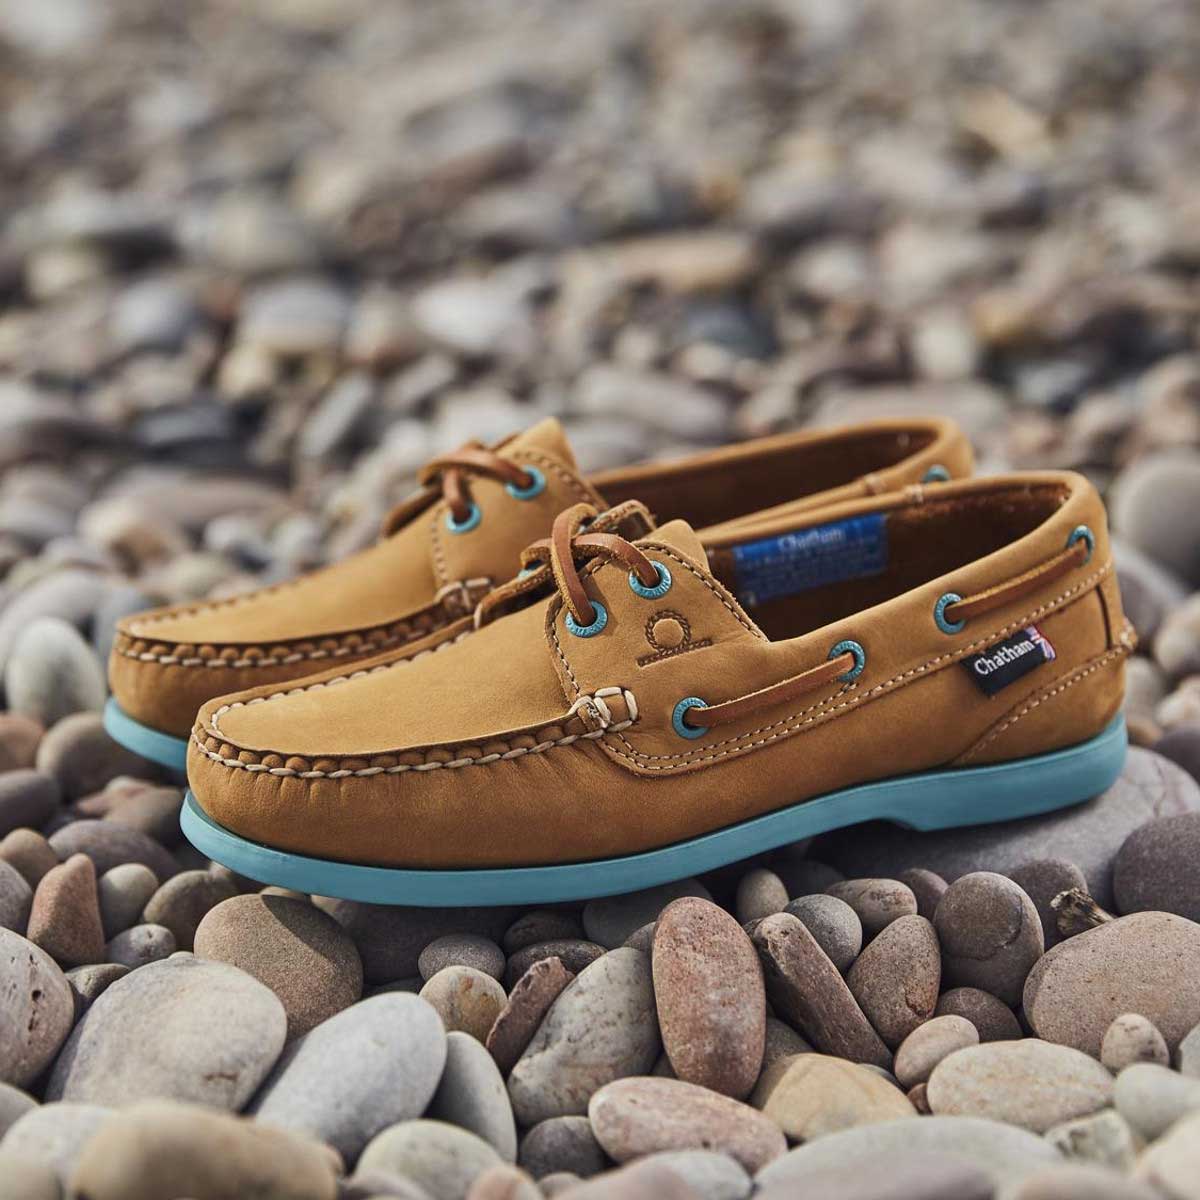 CHATHAM Ladies Pippa II G2 Leather Boat Shoes - Tan/Turquoise